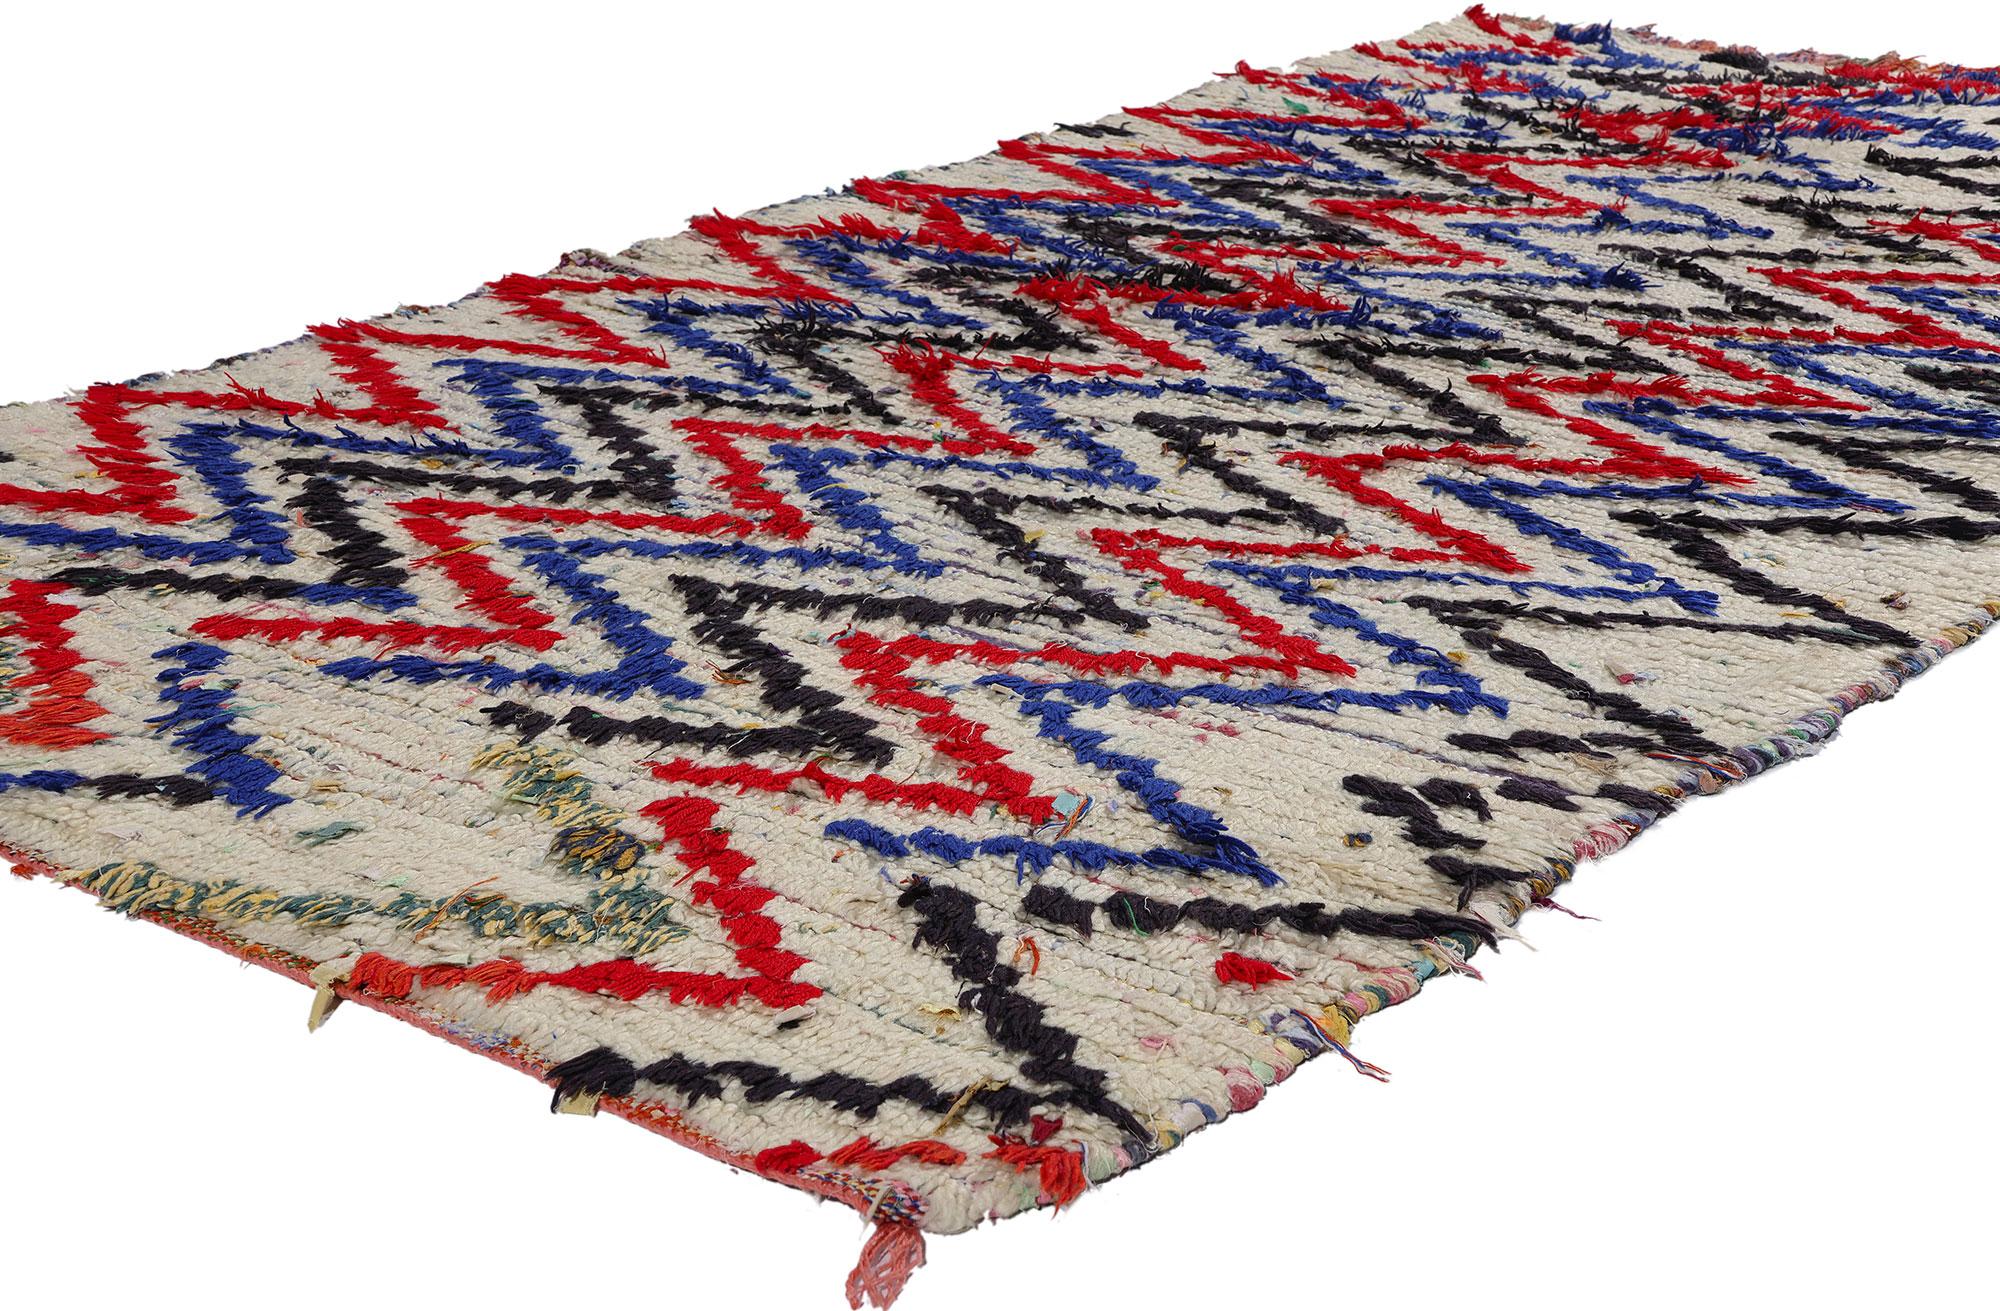 21743 Vintage Boucherouite Moroccan Azilal Rag Rug, 04'00 x 07'01. Azilal rag rugs, lovingly referred to as Azilal Boucherouite rugs, tell an alluring tale of sustainable craftsmanship echoing from the heart of the Azilal region in the Atlas